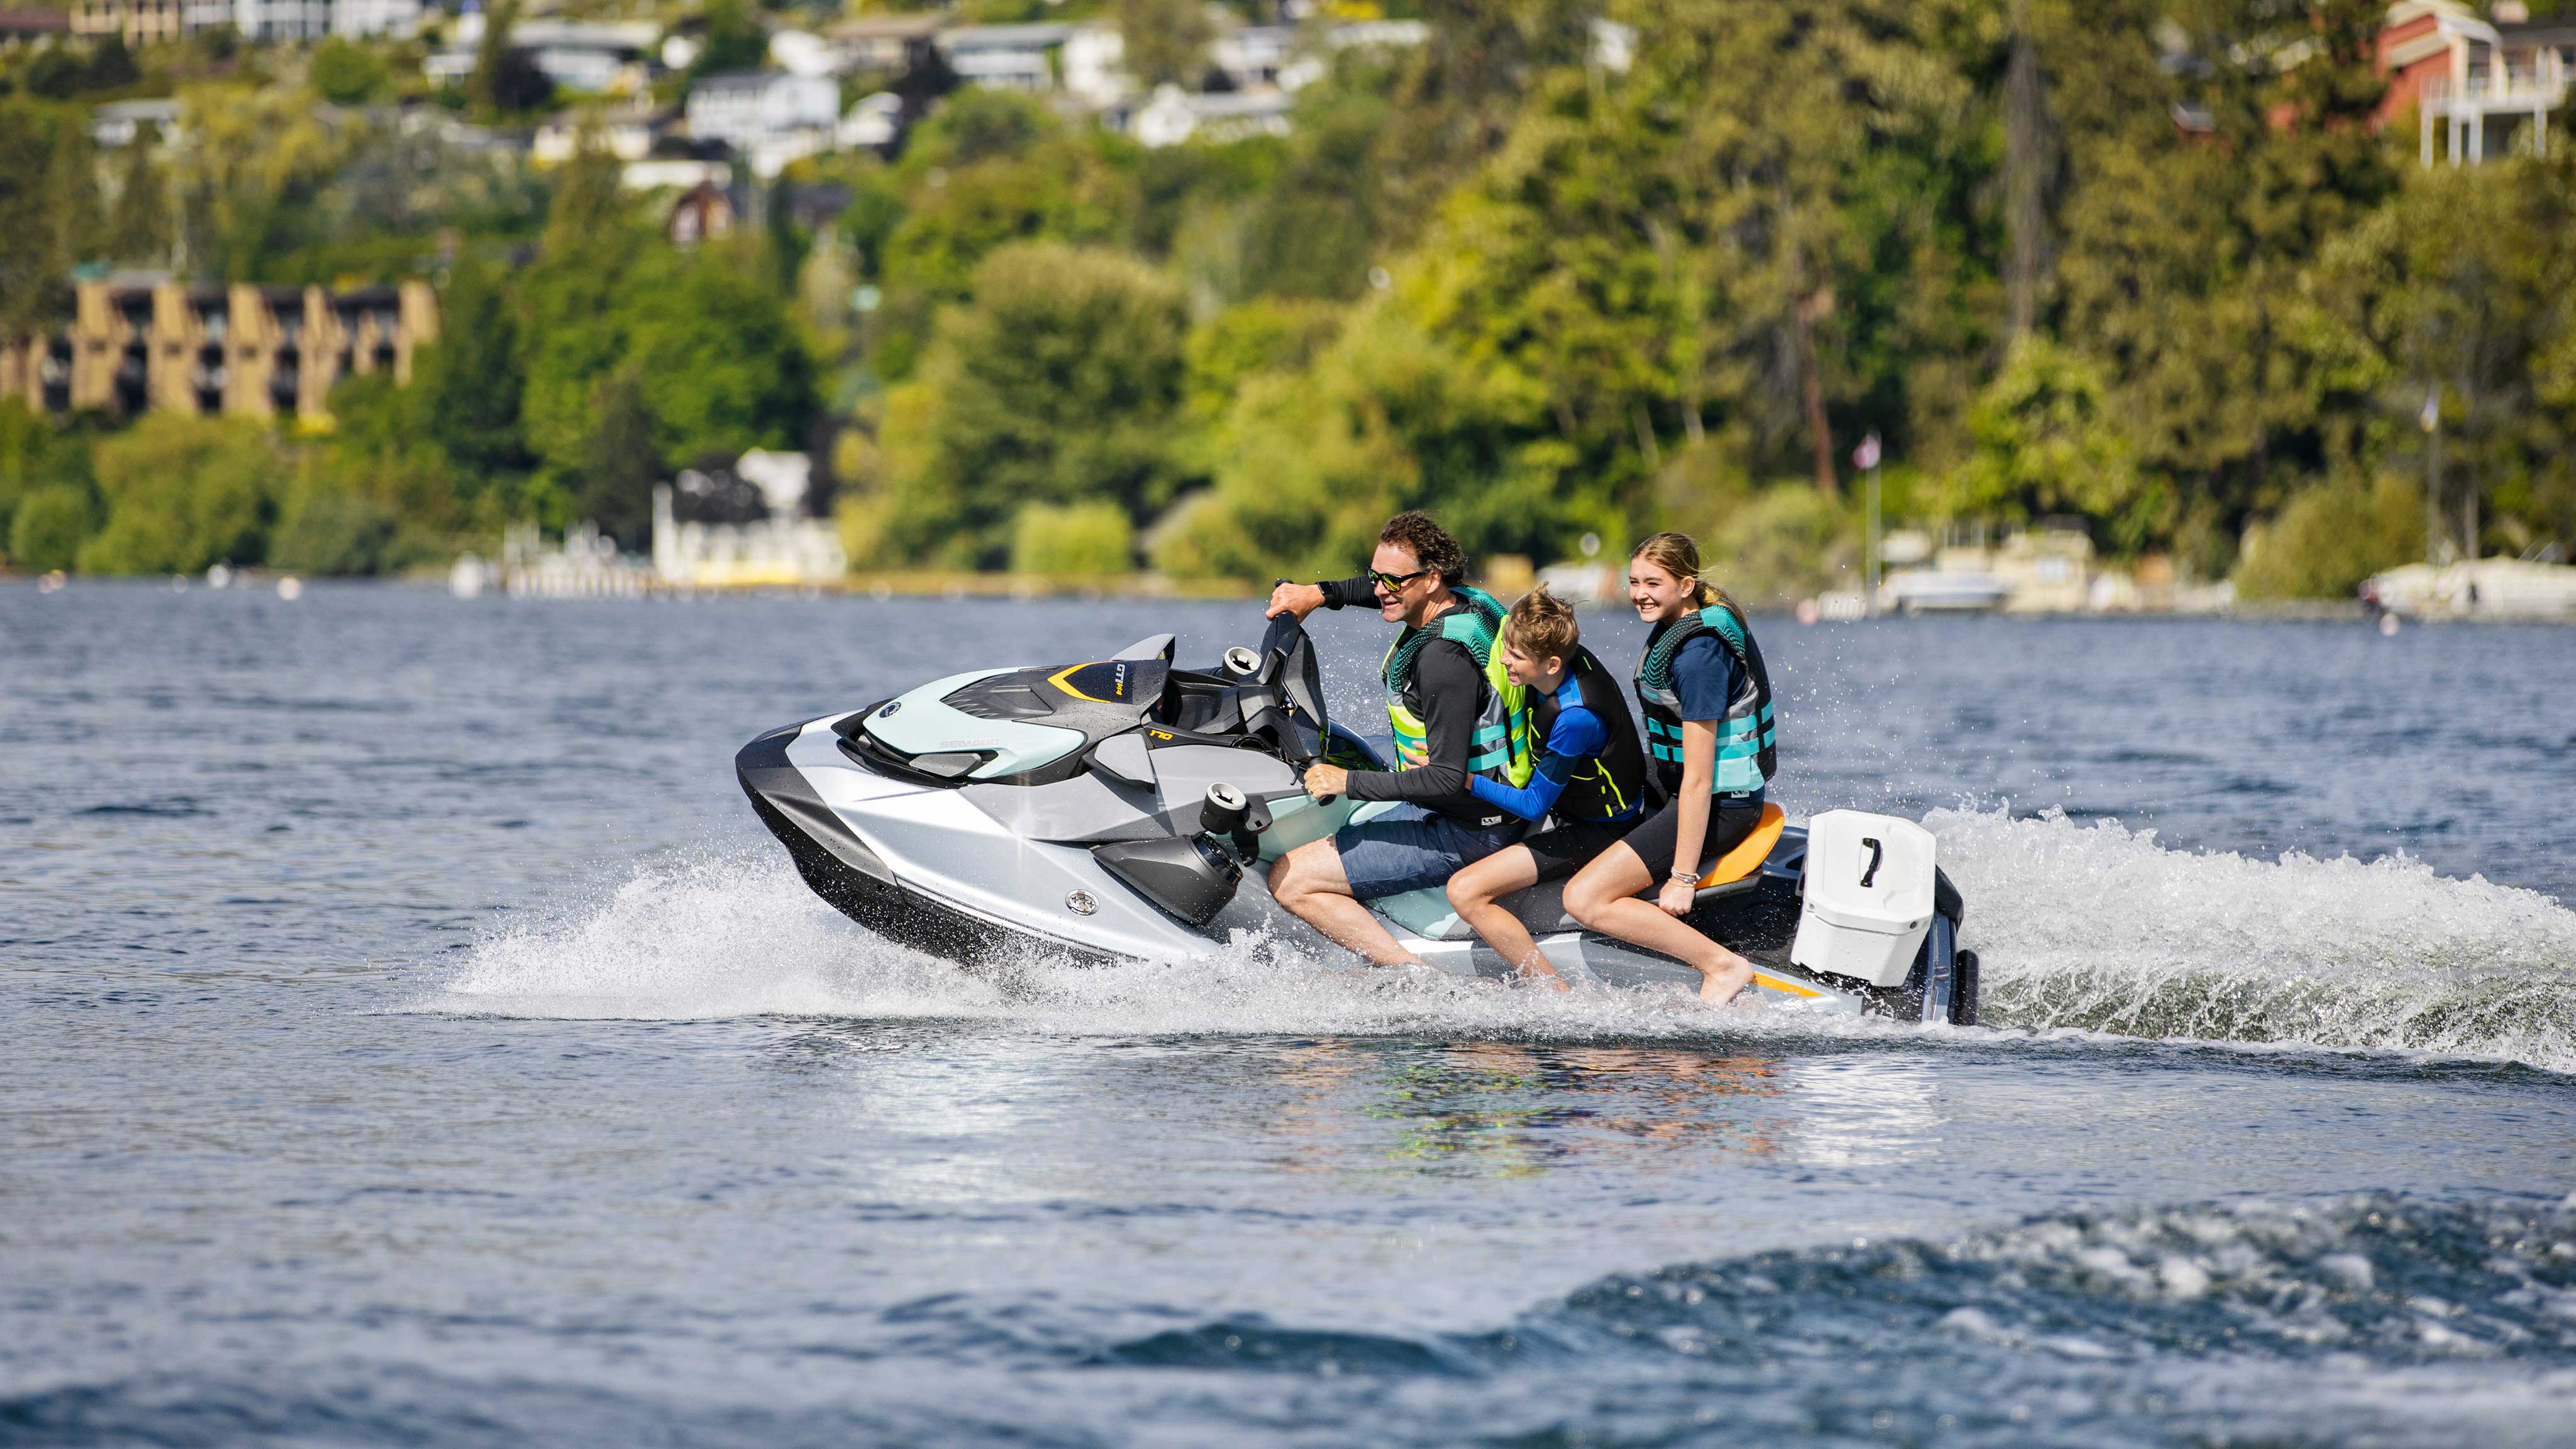 Family riding a Sea-Doo personal watercraft in the water